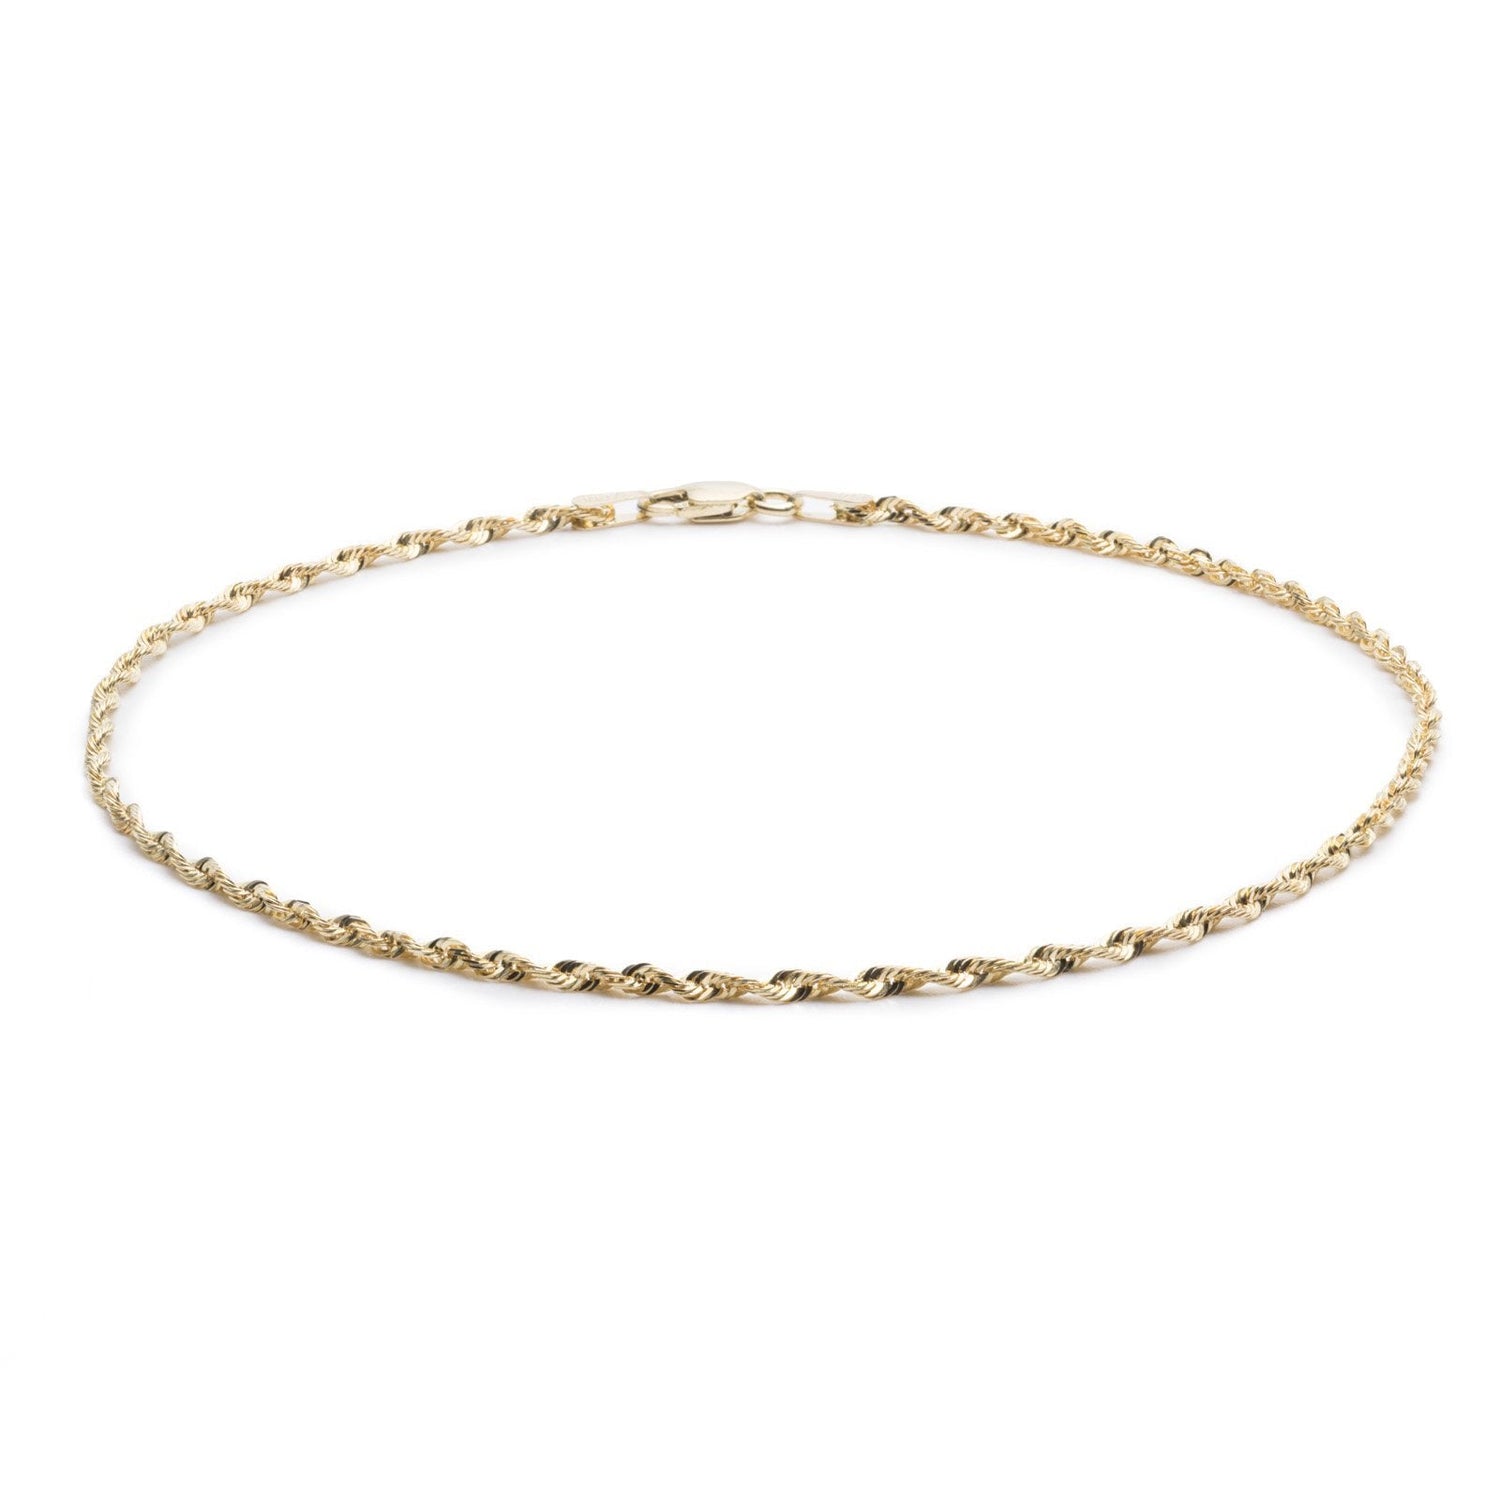 Floreo 10k Yellow Gold 1.5mm Solid Multi Diamond Cut Rope Chain Bracelet and Anklet